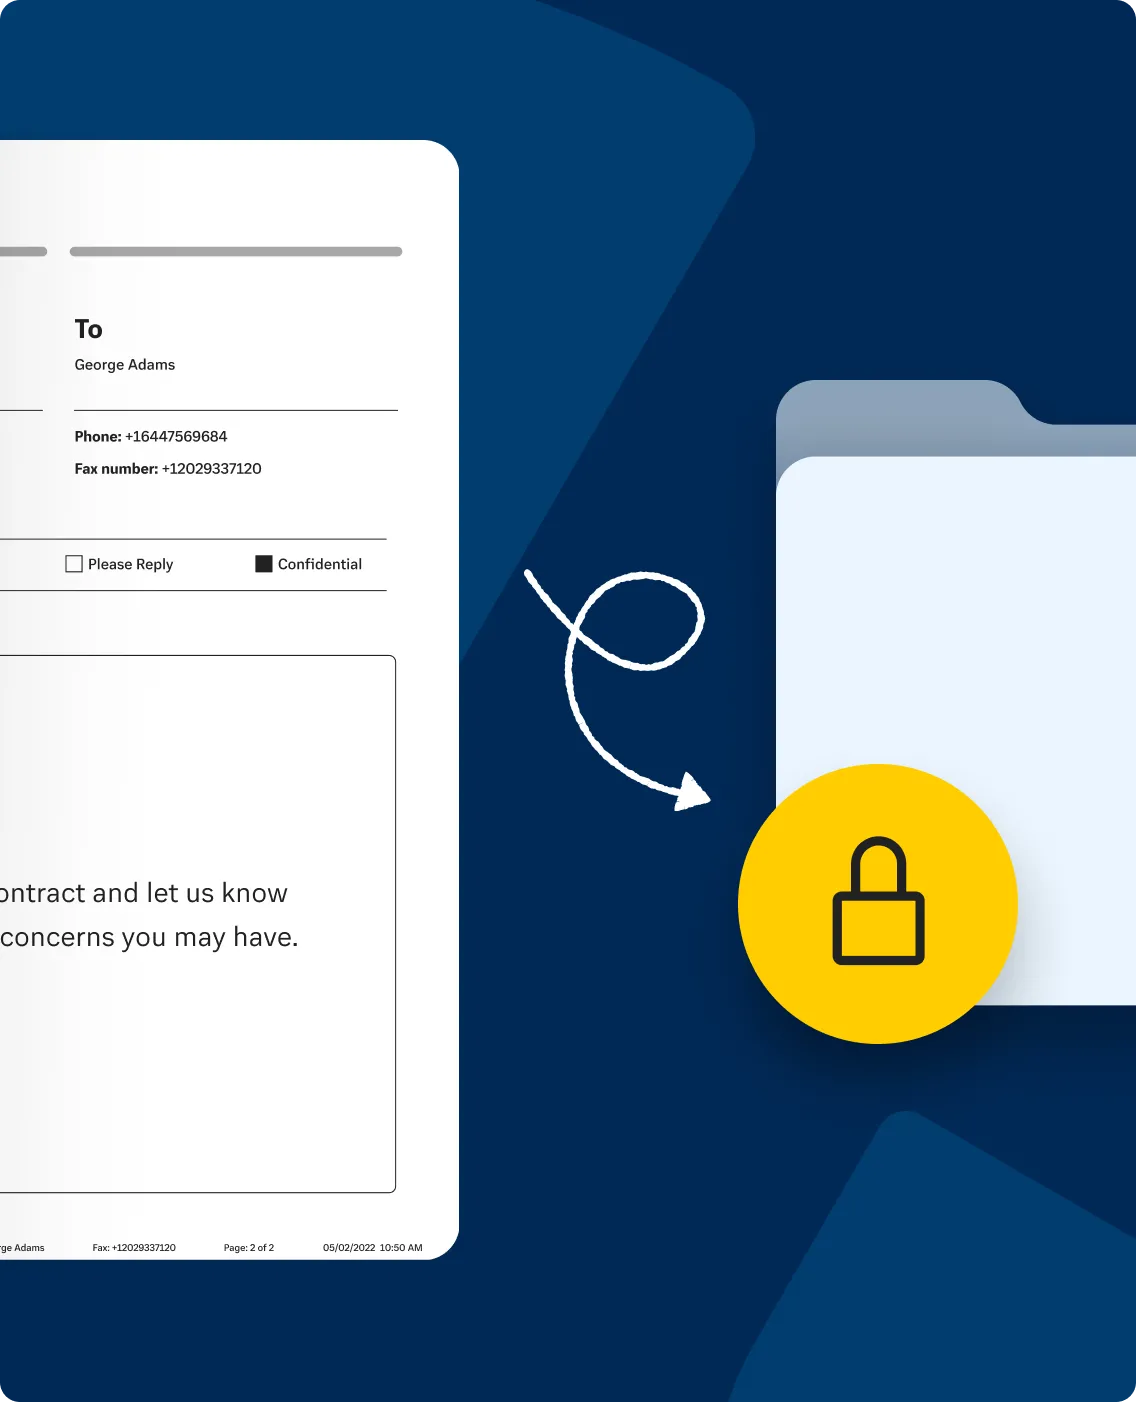 Introducing custom fax cover sheets in RingCentral MVP | RingCentral Blog